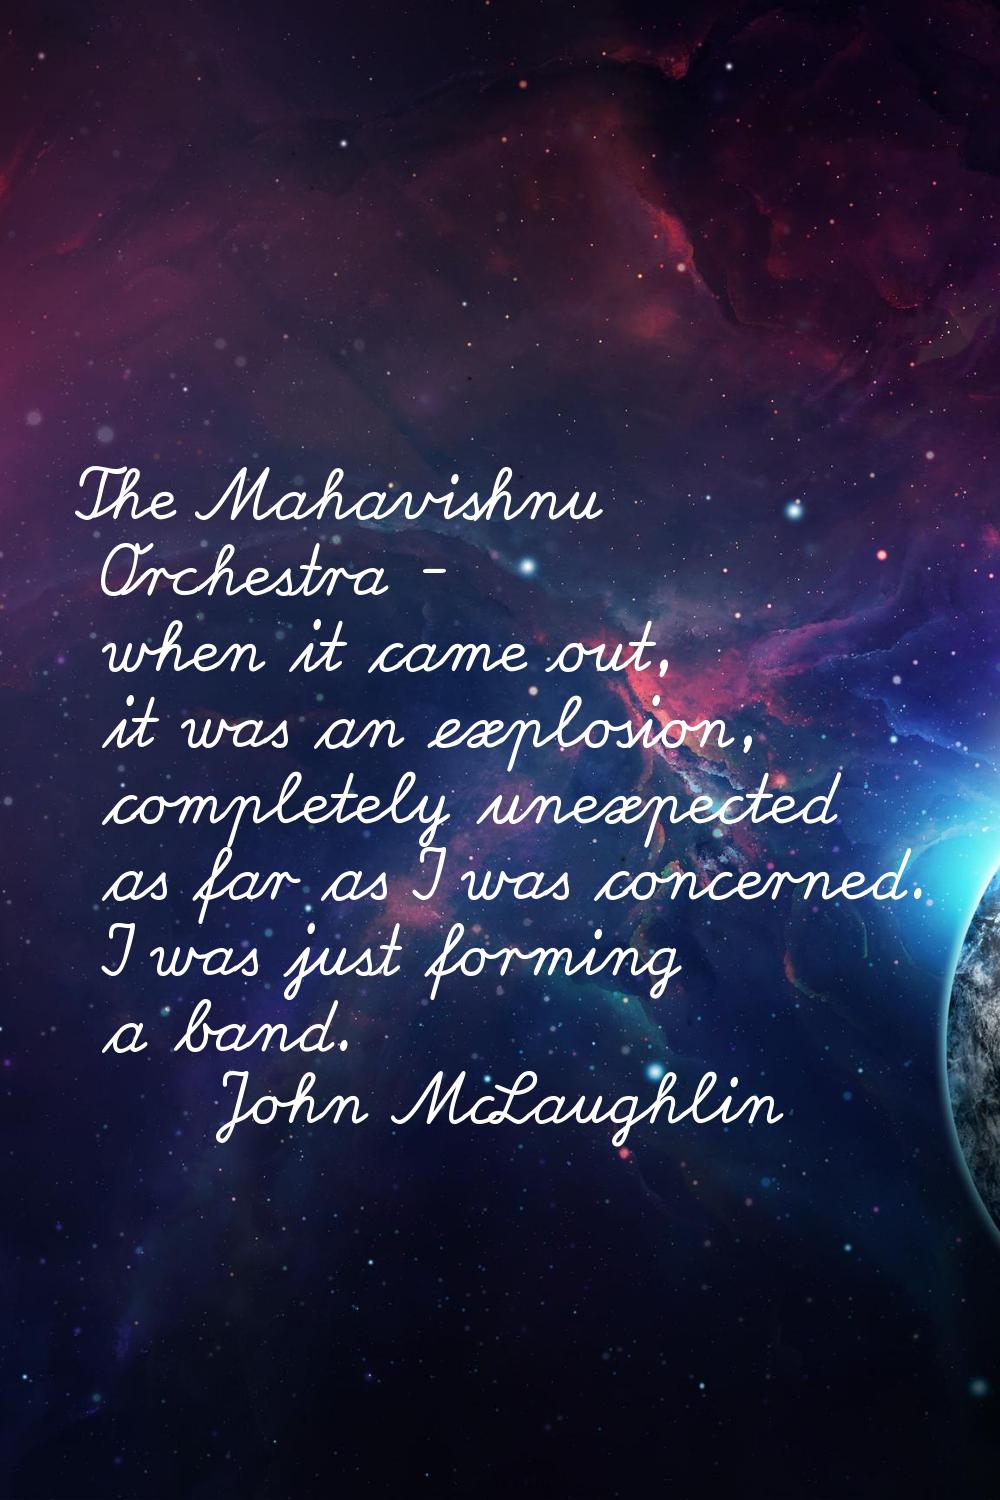 The Mahavishnu Orchestra - when it came out, it was an explosion, completely unexpected as far as I